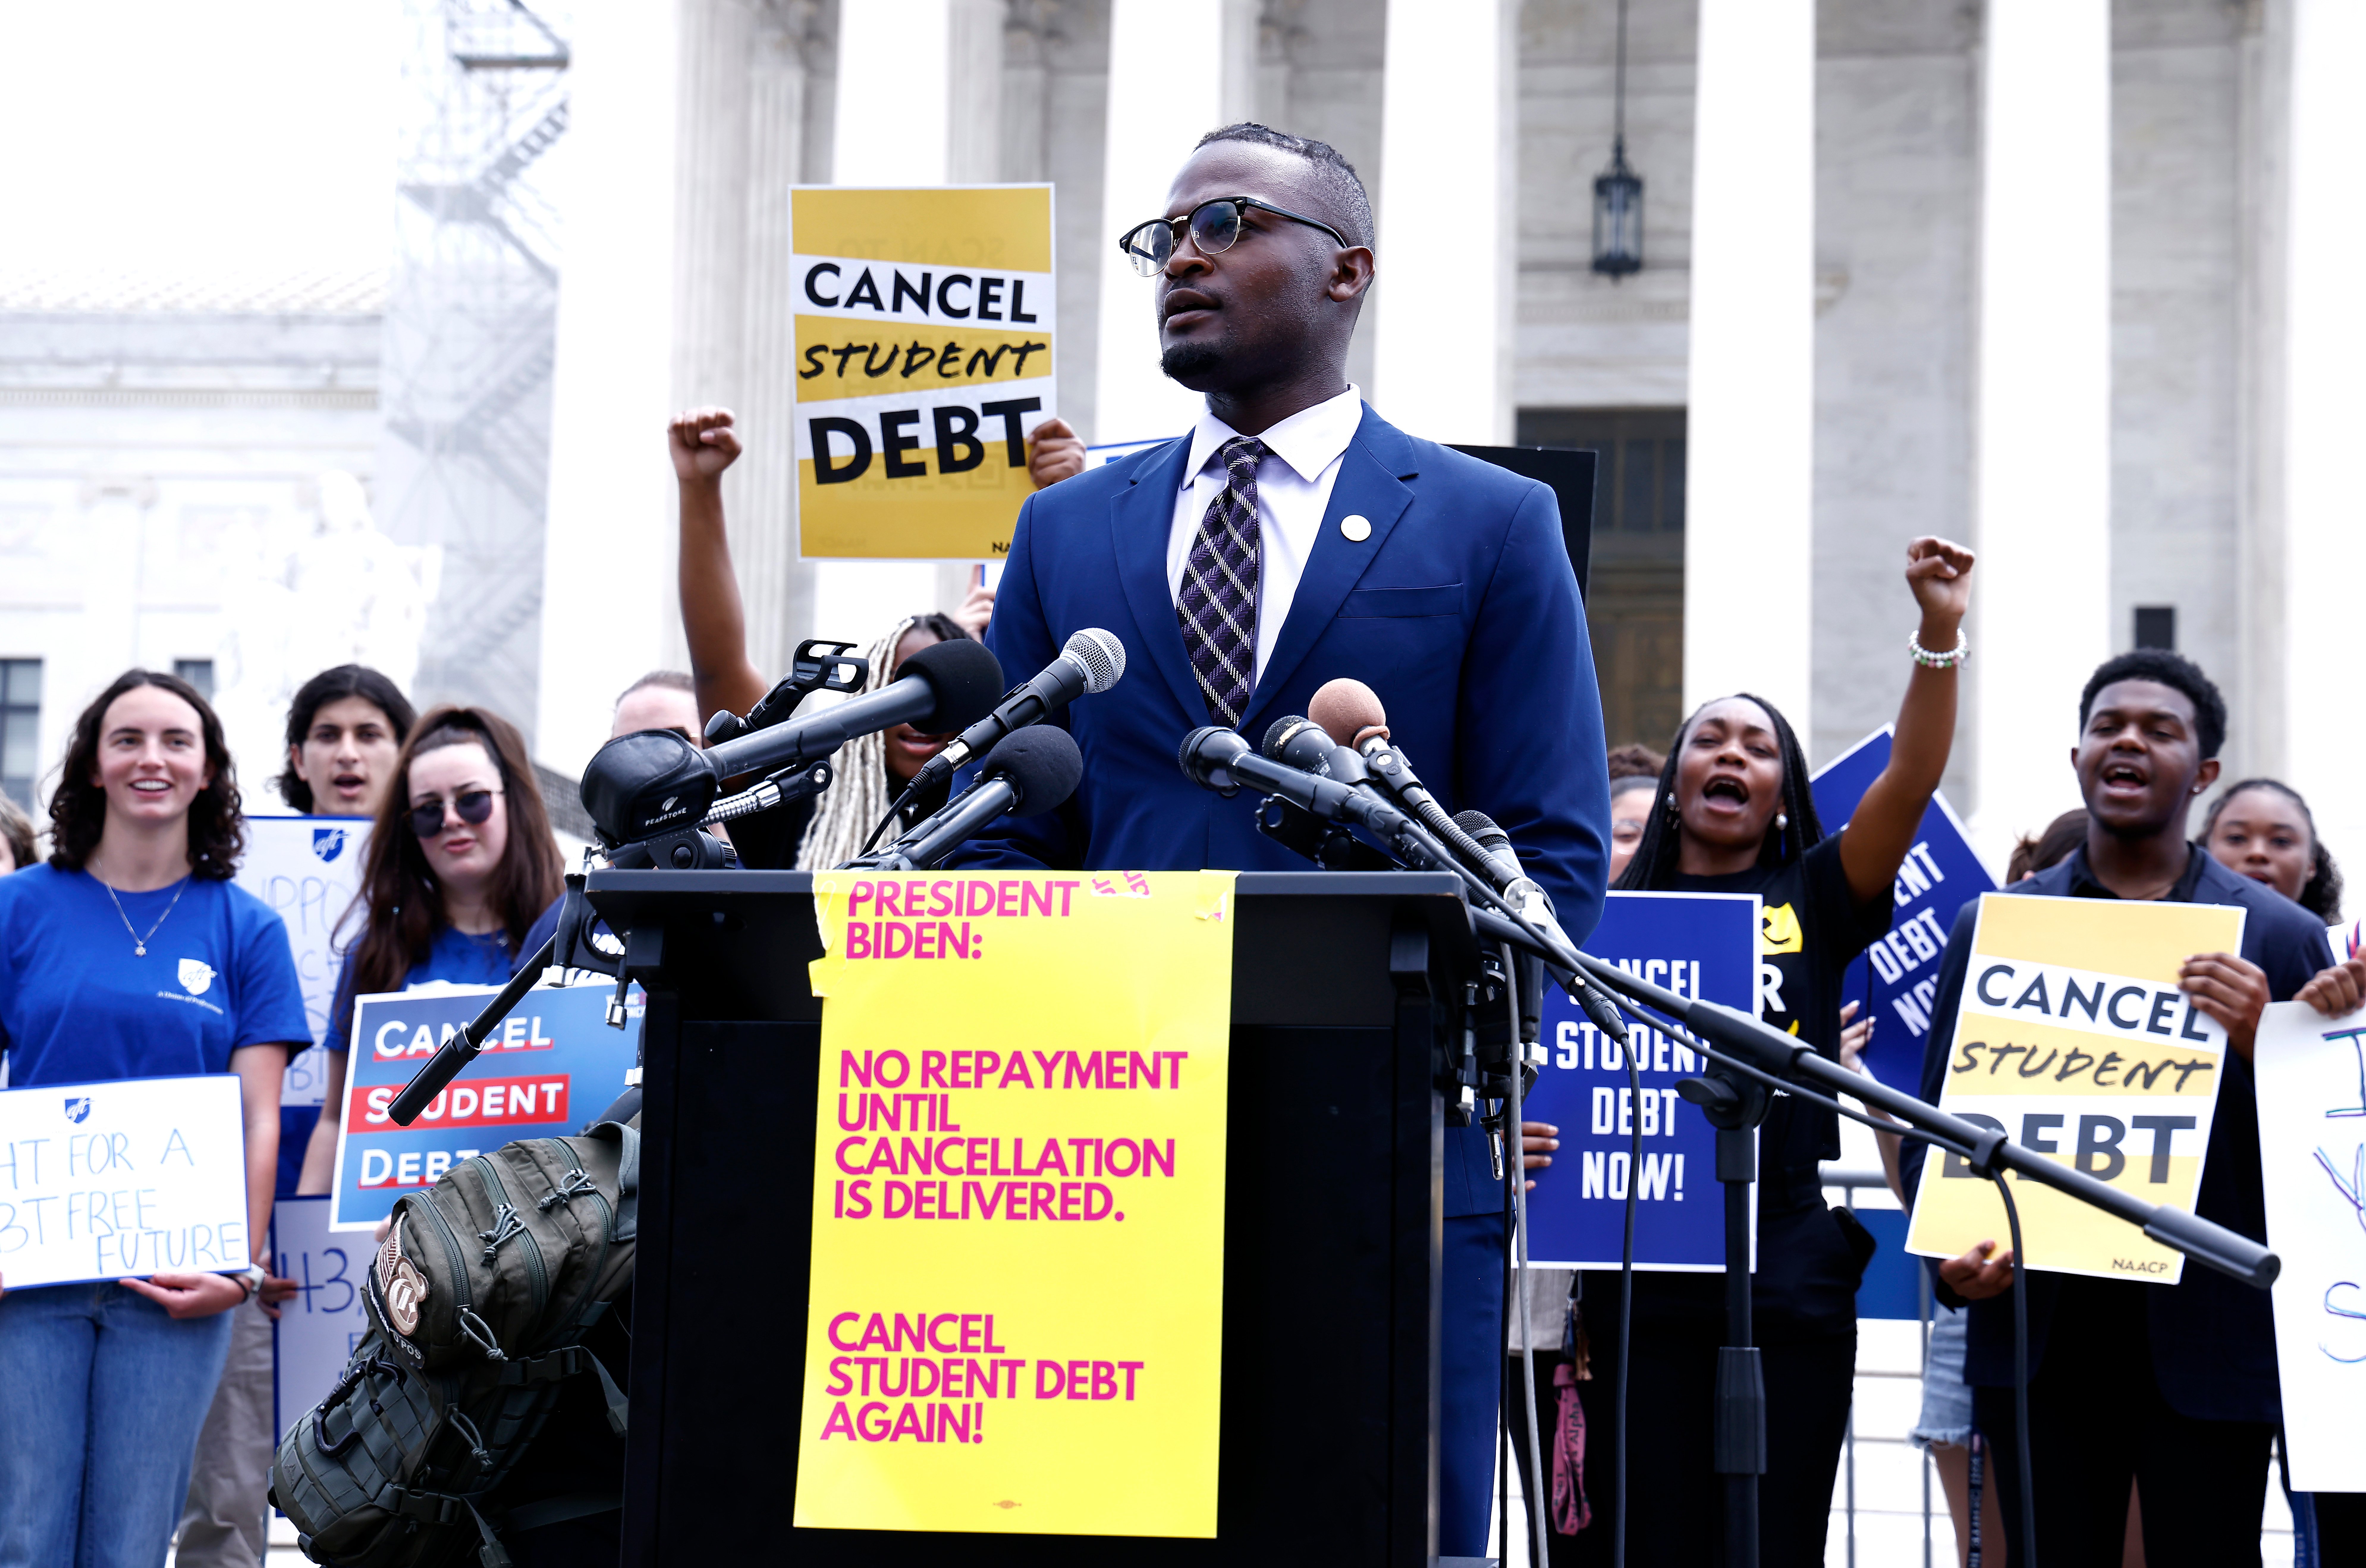 Wisdom Cole, NAACP, joins student loan borrowers to demand President Biden use "Plan B" to cancel student debt Immediately at a rally outside of the Supreme Court of the United States on June 30, 2023 in Washington, DC. (Photo by Paul Morigi/Getty Images for We The 45 Million)